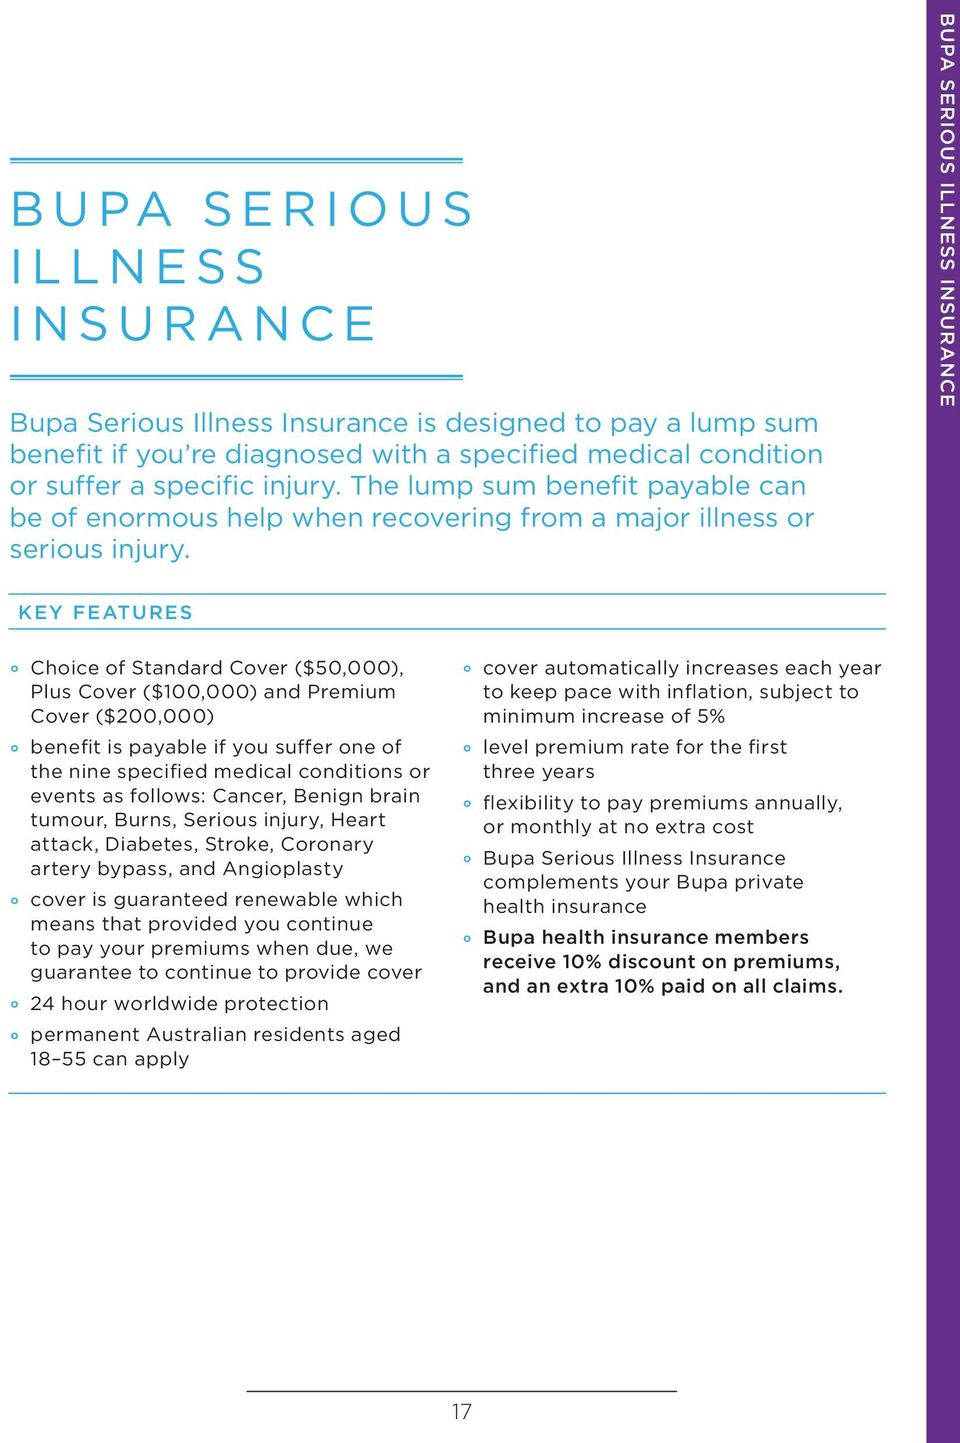 BUPA SERIOUS ILLNESS INSURANCE KEY FEATURES Choice of Standard Cover ($50,000), Plus Cover ($100,000) and Premium Cover ($200,000) benefit is payable if you suffer one of the nine specified medical